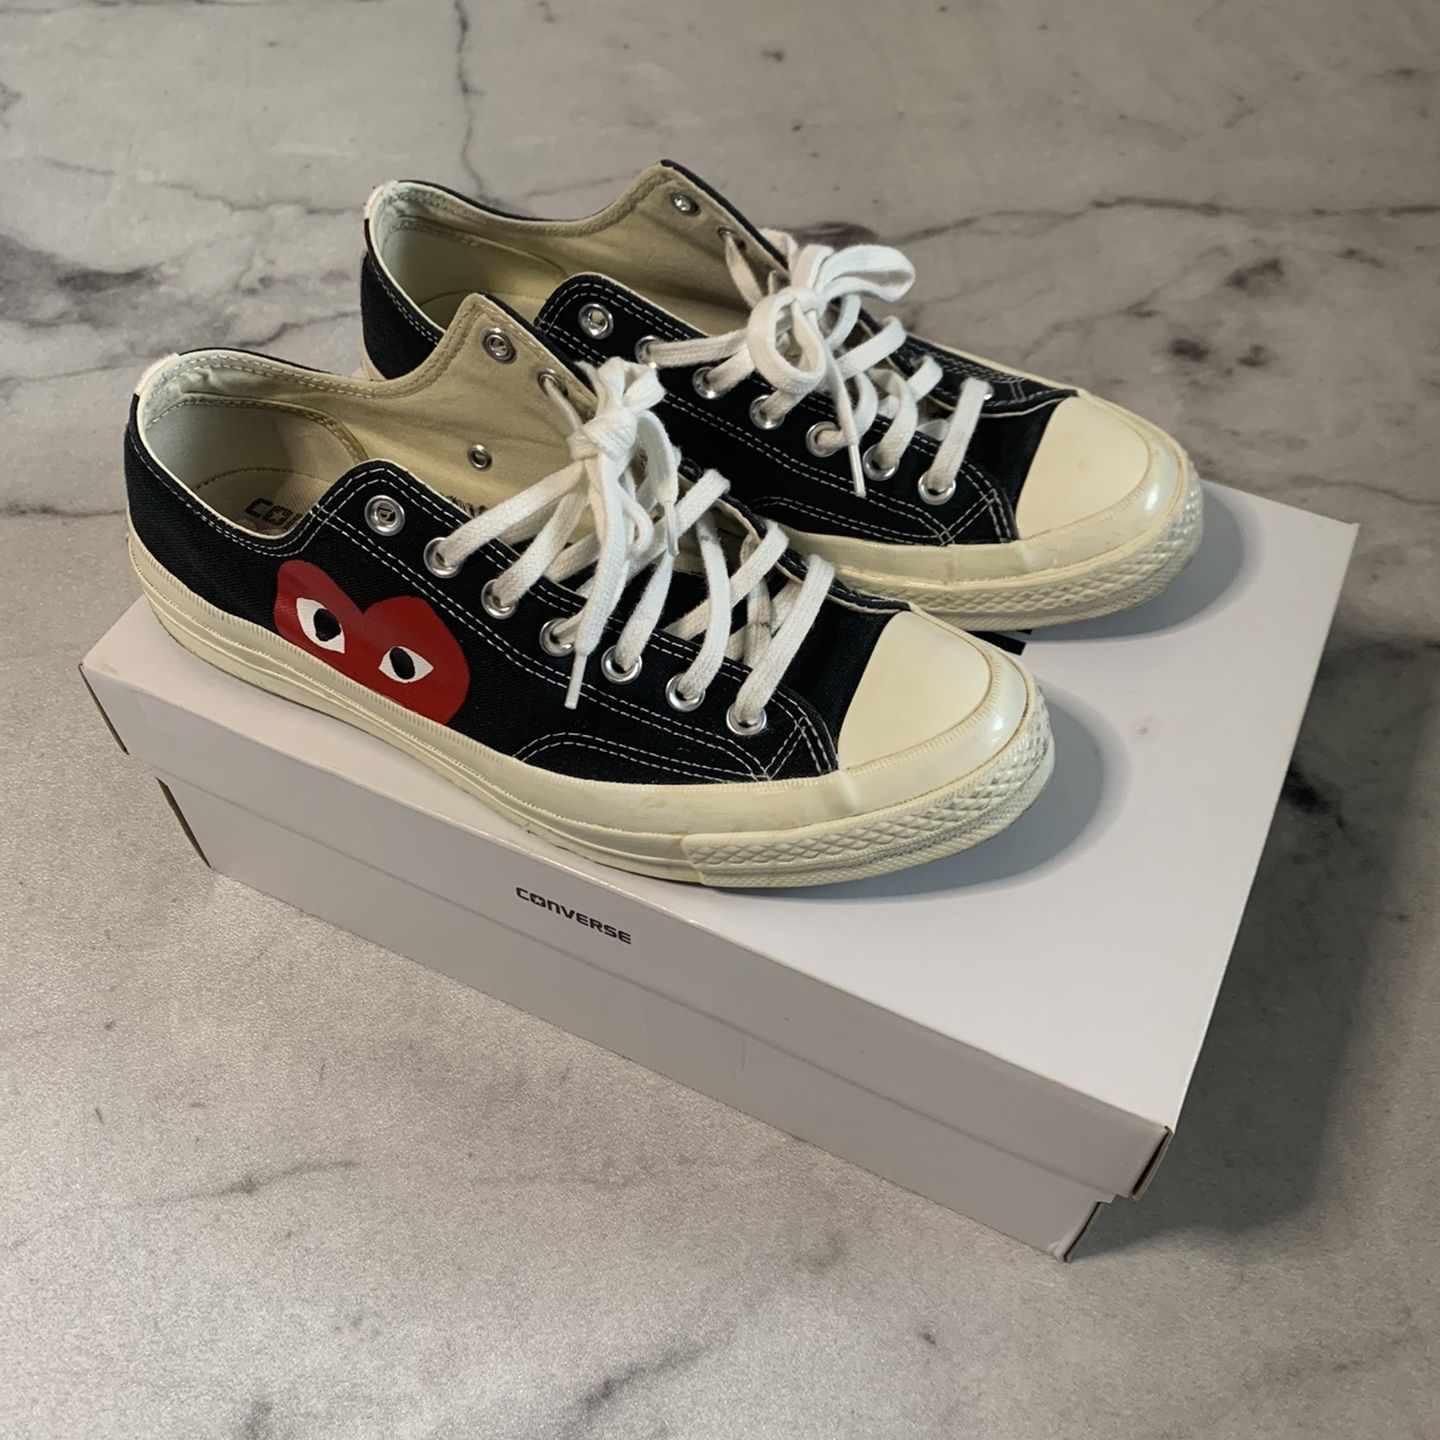 CDG Black Heart Converse Low Mens Size 10/10.5 for Sale in Federal Way, WA - OfferUp